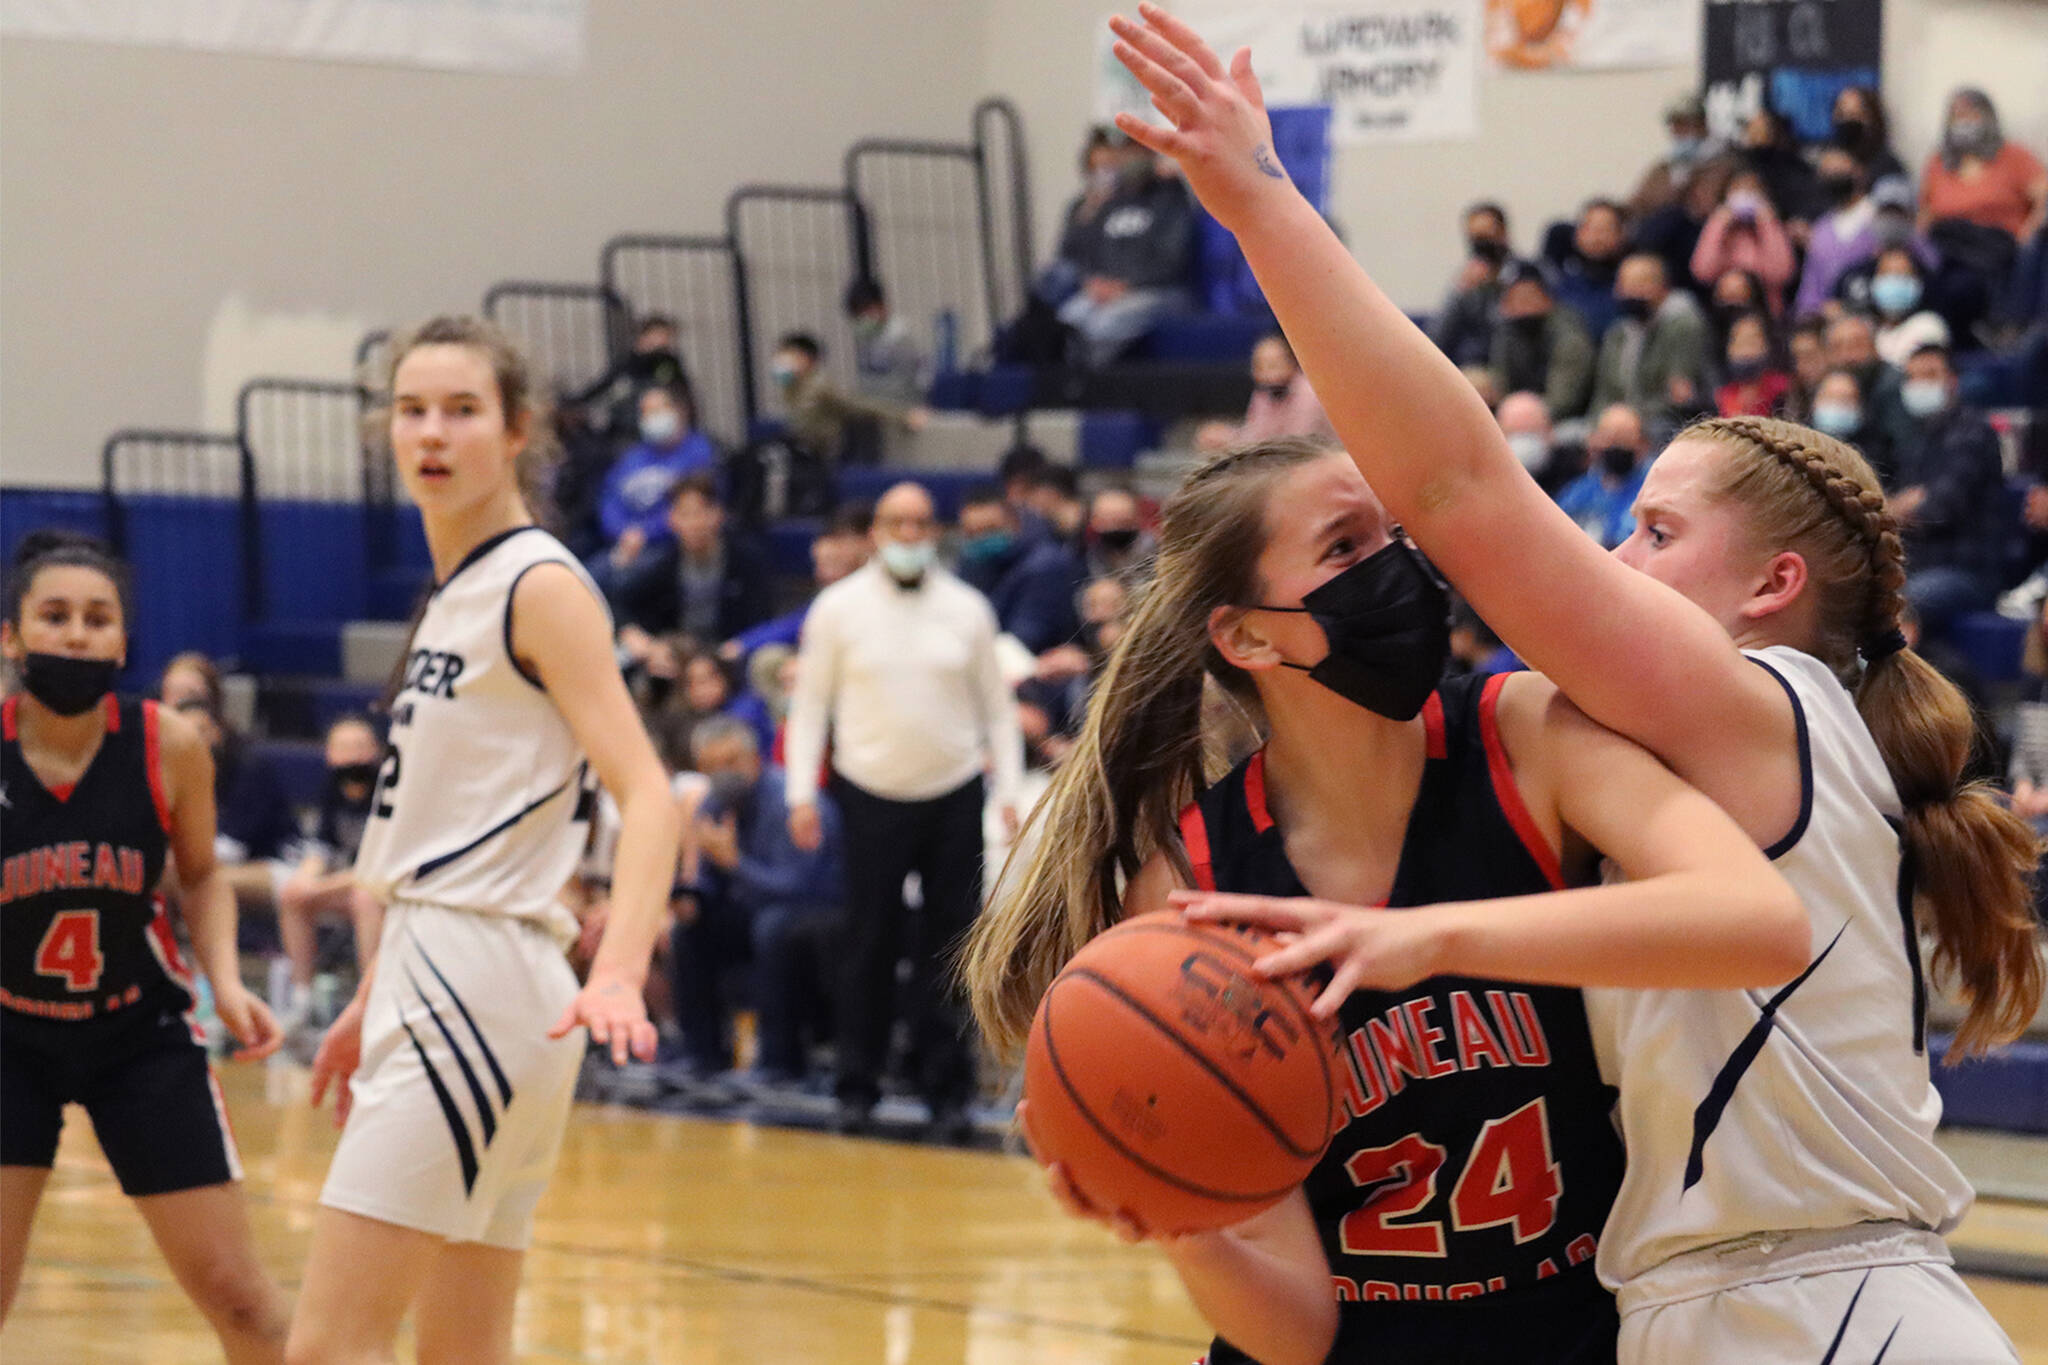 JDHS’ Mila Hargrave pivots toward the hoop for a tough inside shot while tightly defended by TMHS’ Sydney Strong. In the background JDHS’ Kiyara Miller and TMHS’ Kerra Baxter look on. (Ben Hohenstatt / Juneau Empire File)